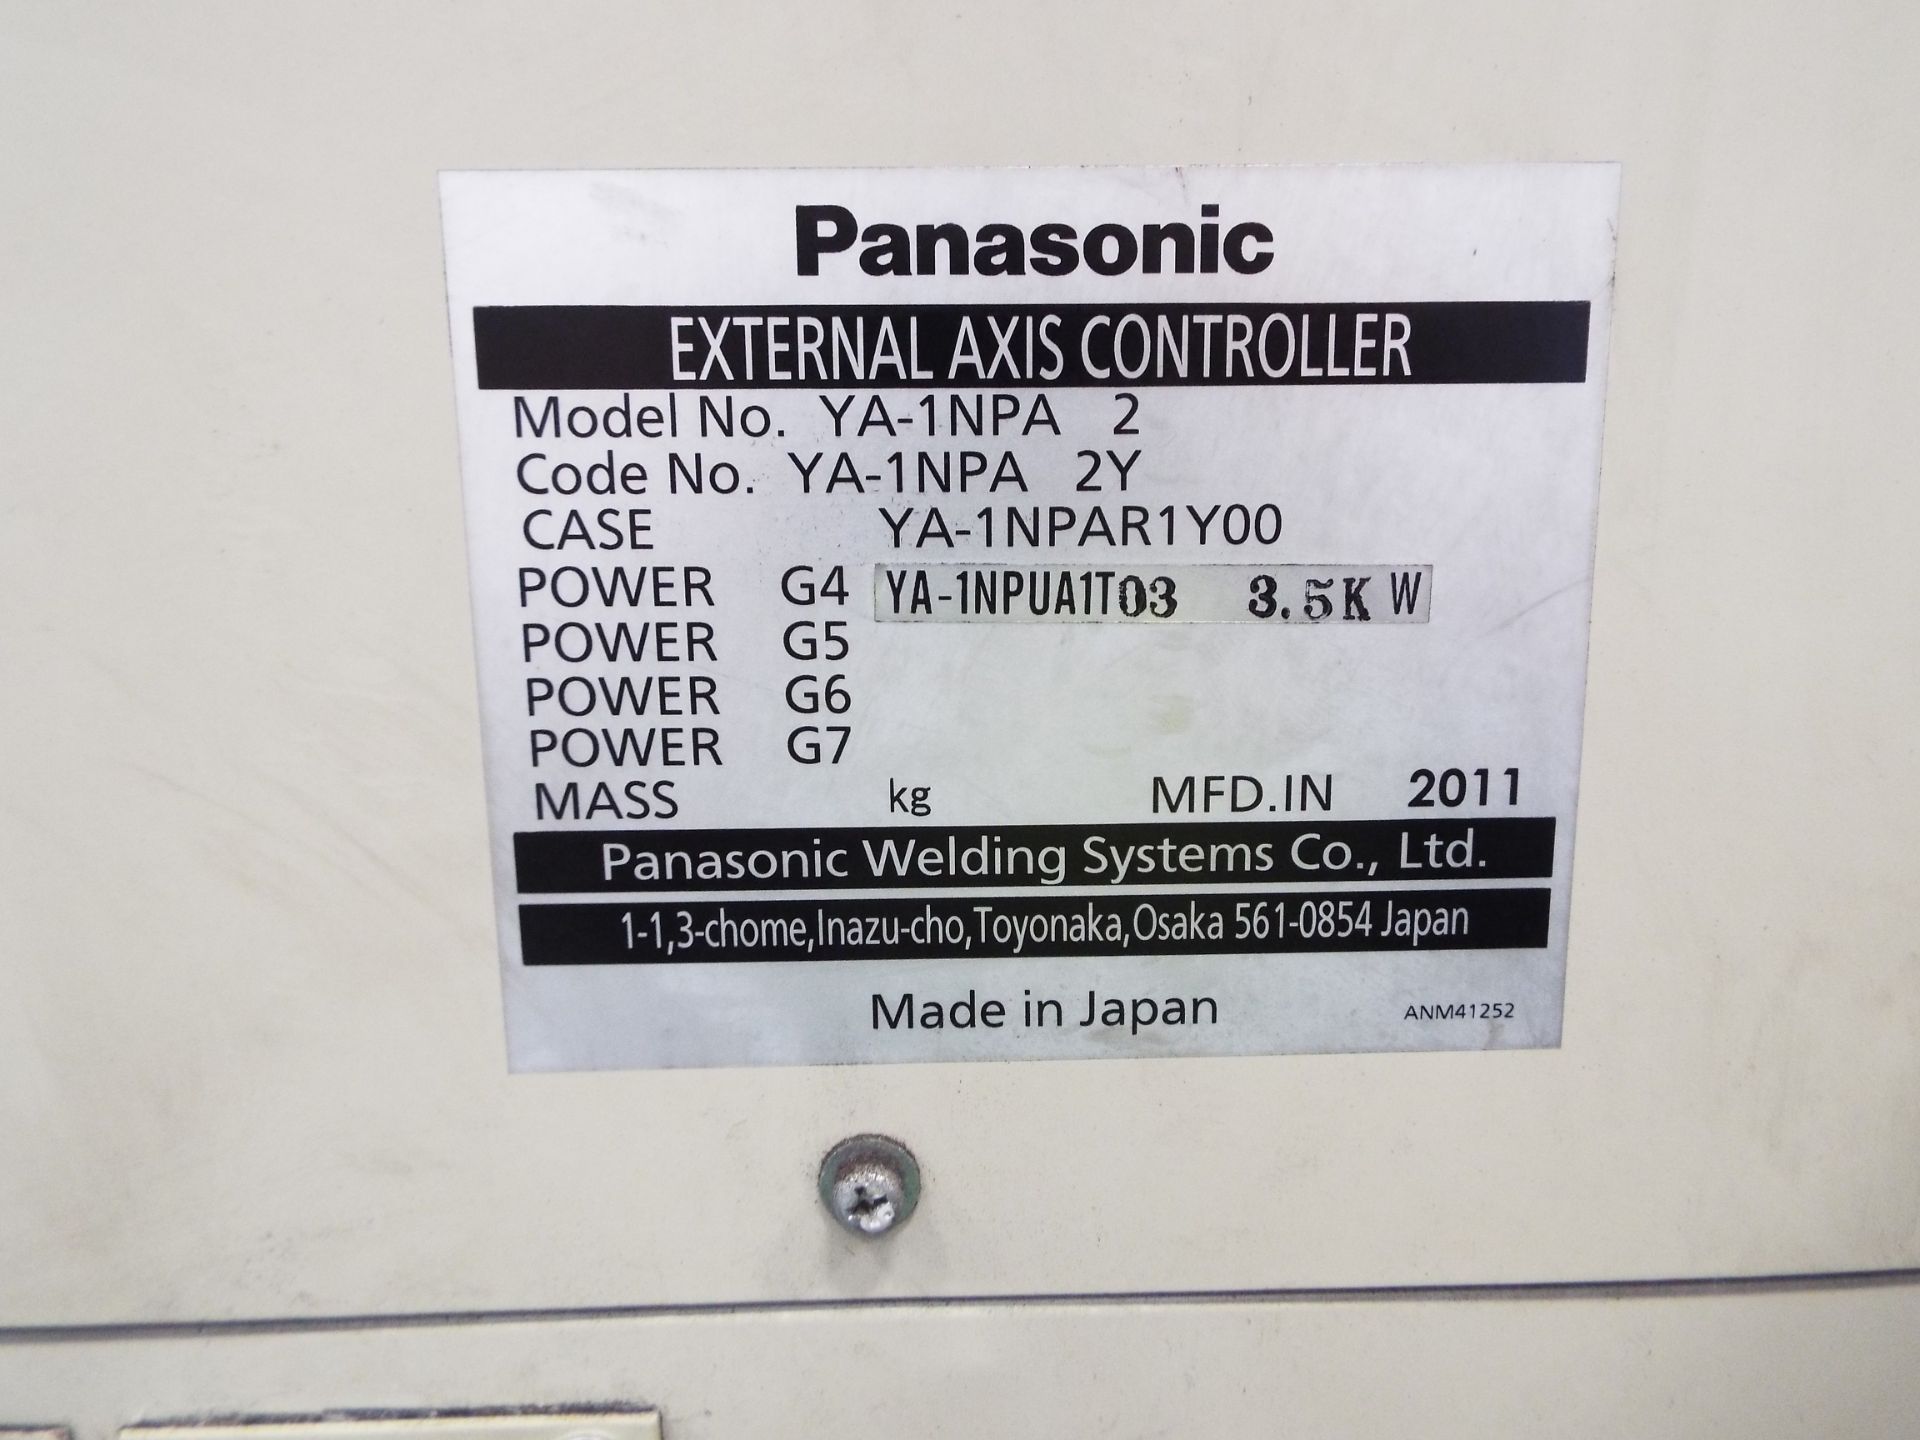 Panasonic TA1800 MIG Welding Robot cw Power Source,Transformer & 7th Axis Rotating Positioner - Image 5 of 12